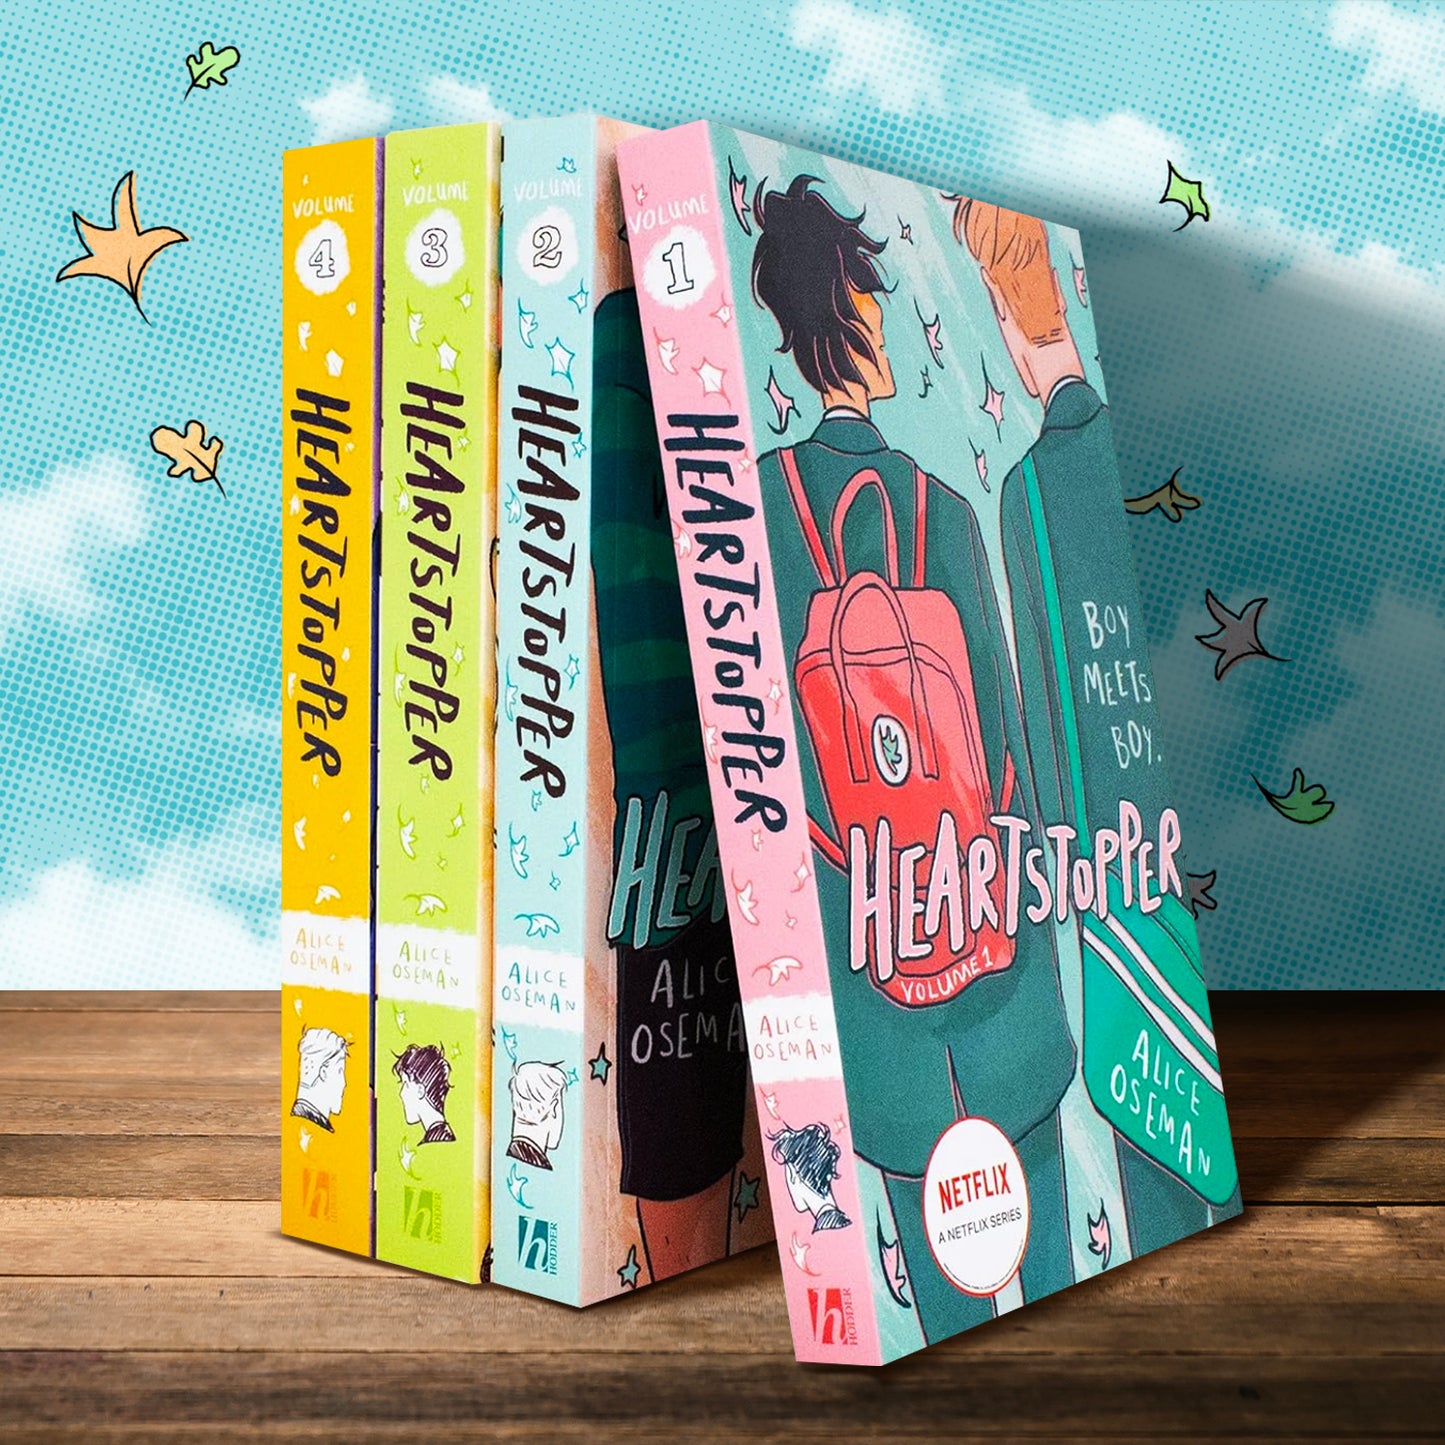 Load image into Gallery viewer, The first 4 volumes of &amp;#39;Heartstopper&amp;#39;, spines out, on a wooden table. The books are in front of a cloudy background illustrated with the classic Heartstopper leaves
